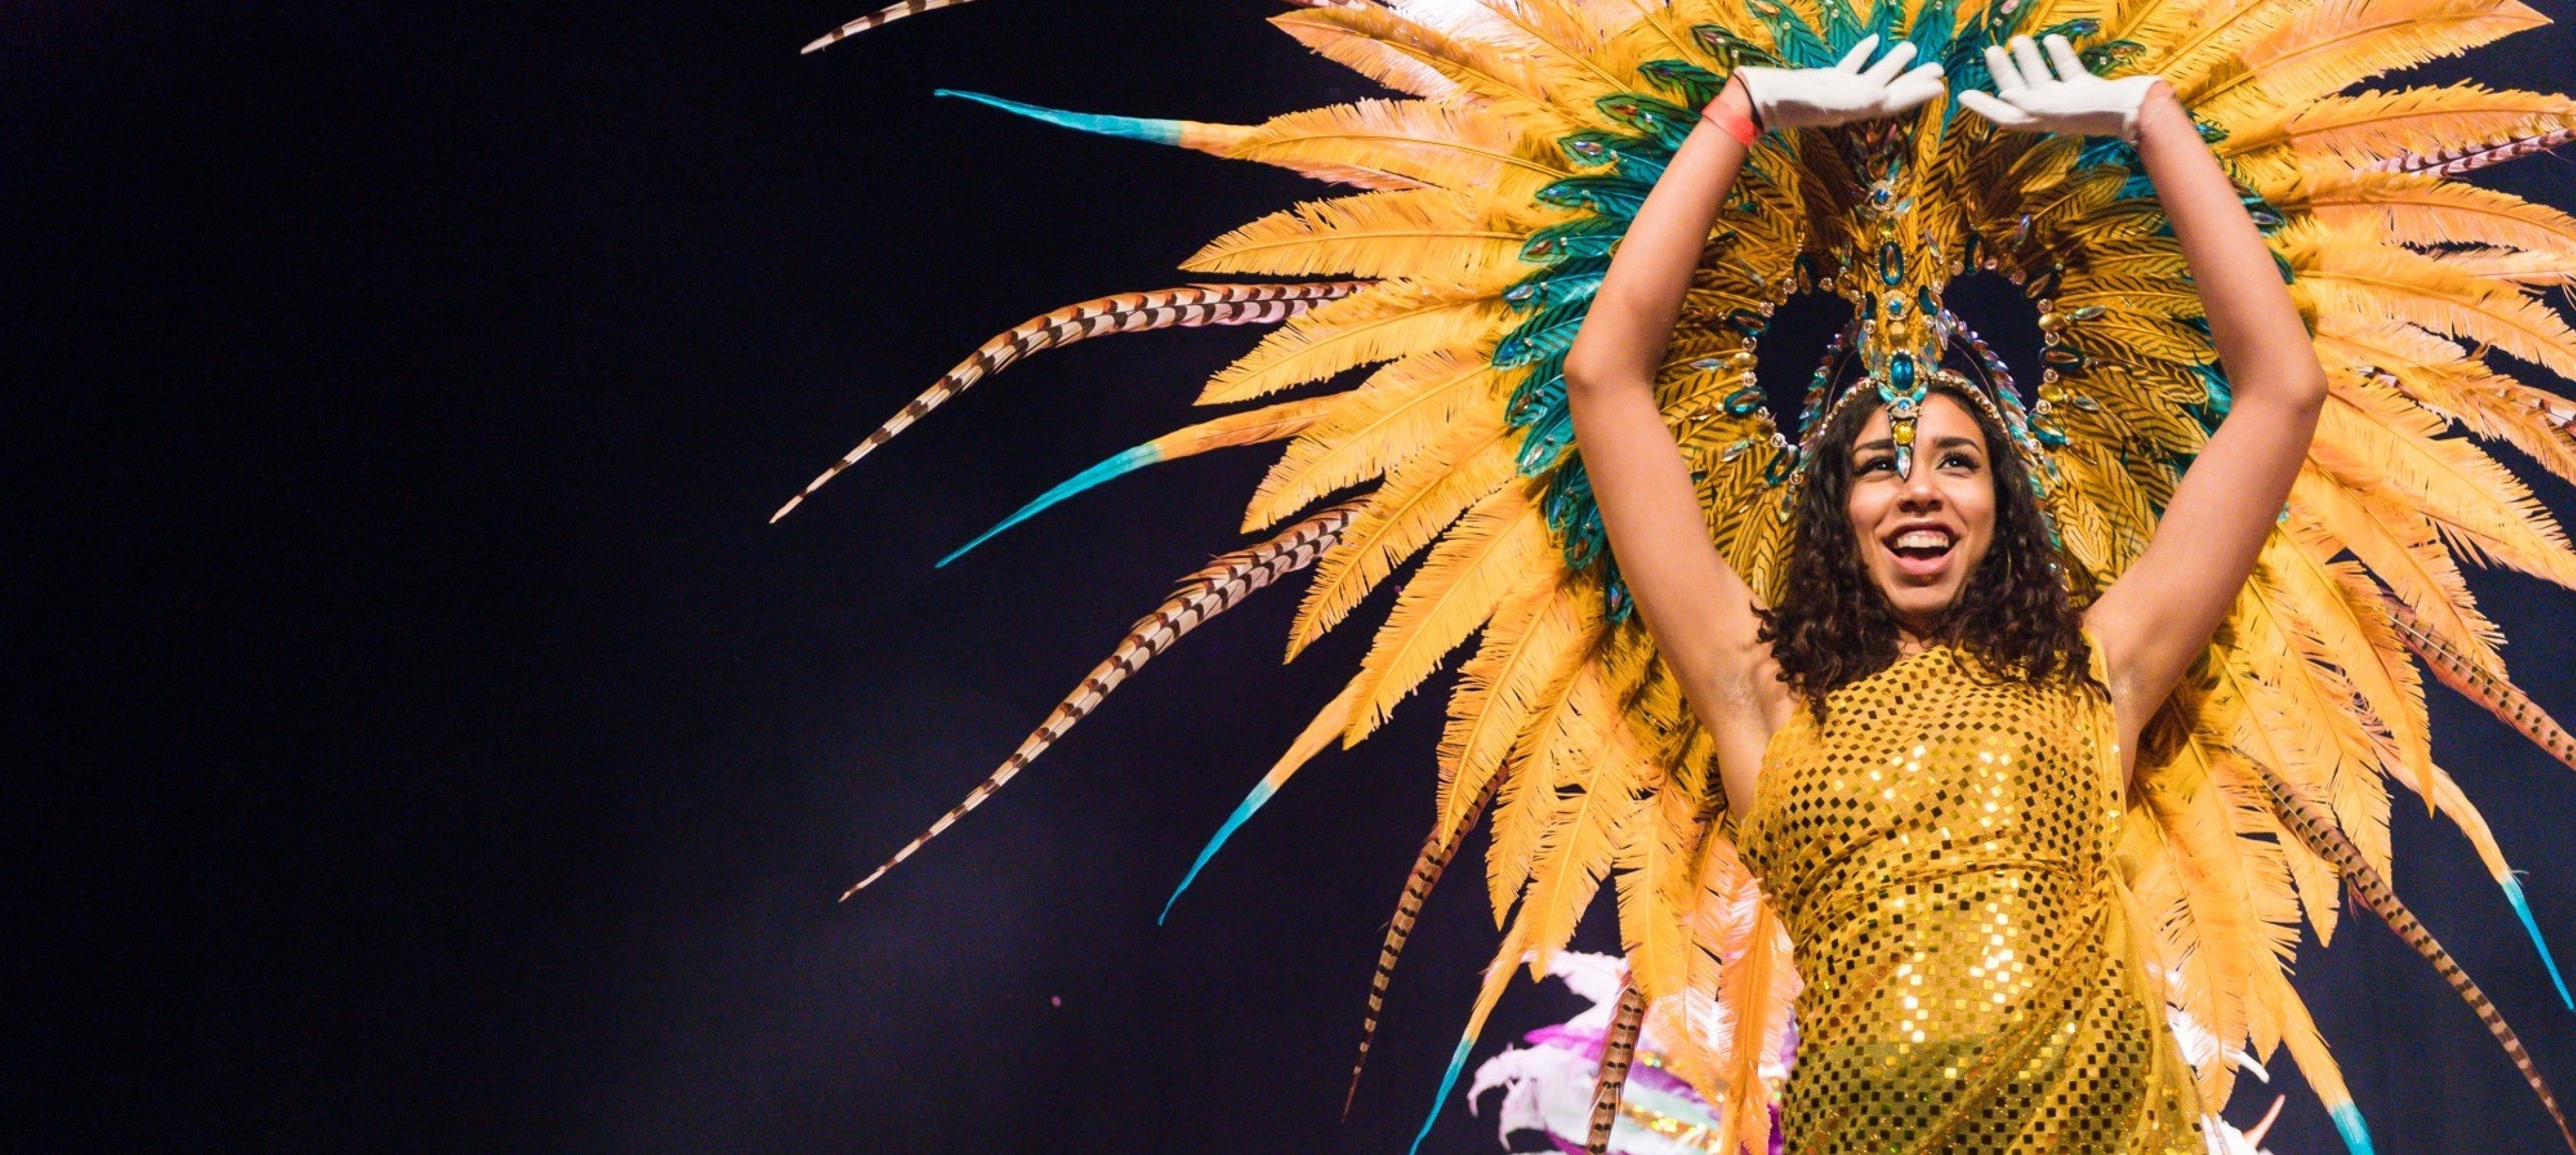 A student wearing a sparkly yellow dress and large headress at Imperial's Afrogala celebration